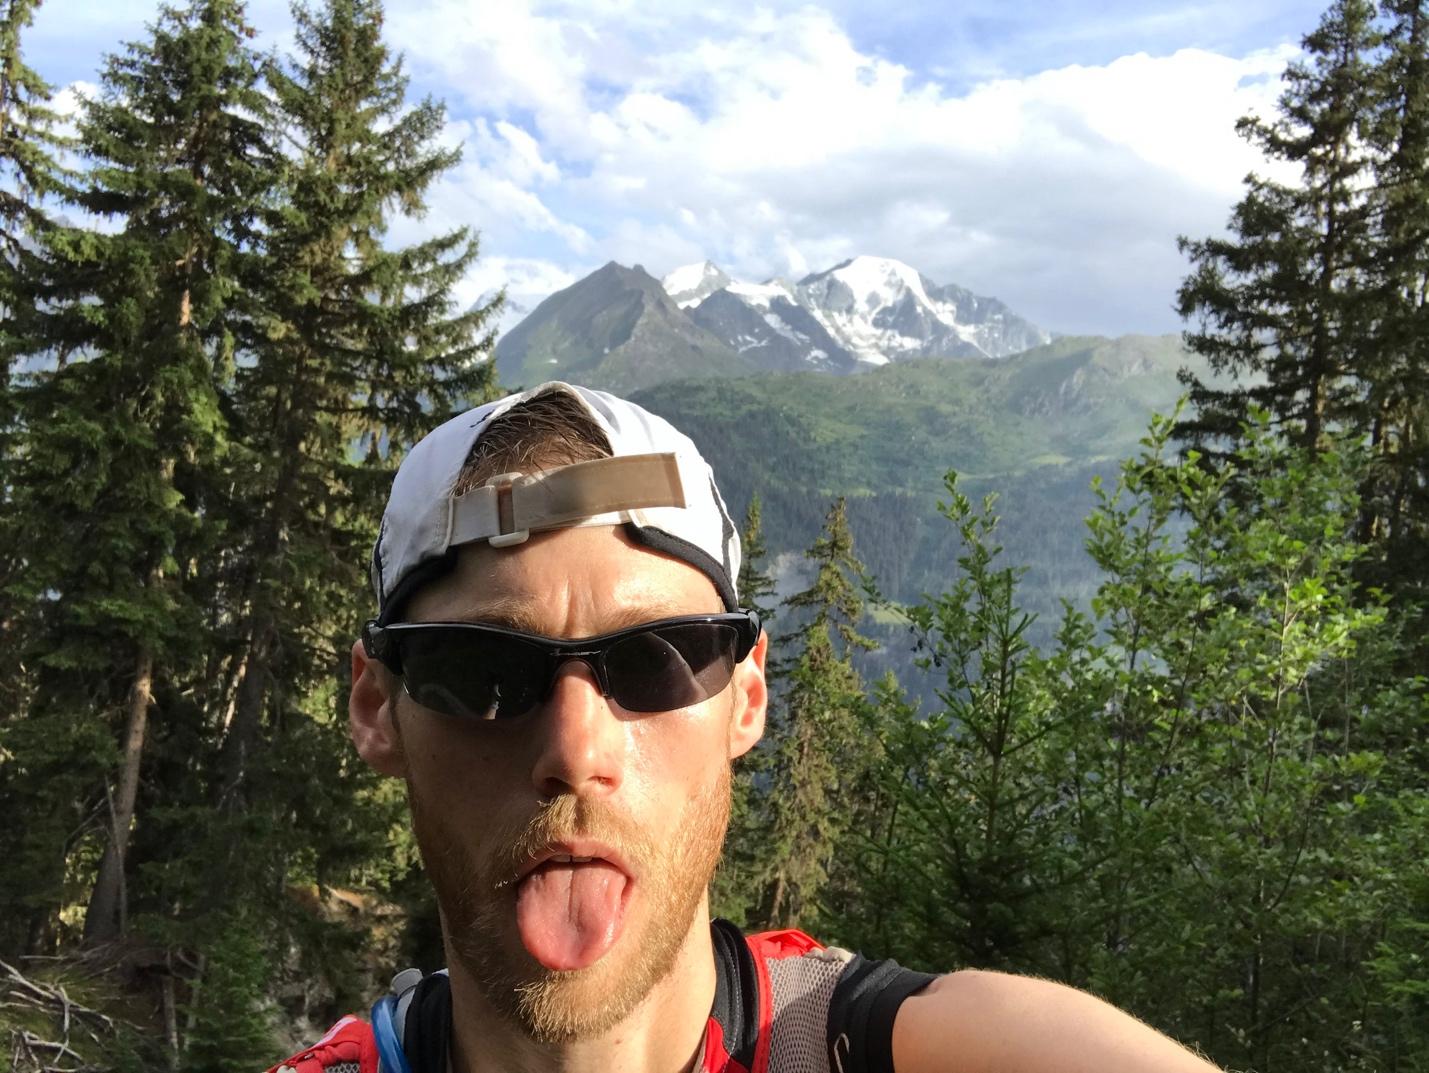 Uphill Athlete Coach Will Weidman takes a selfie break from training for UTMB